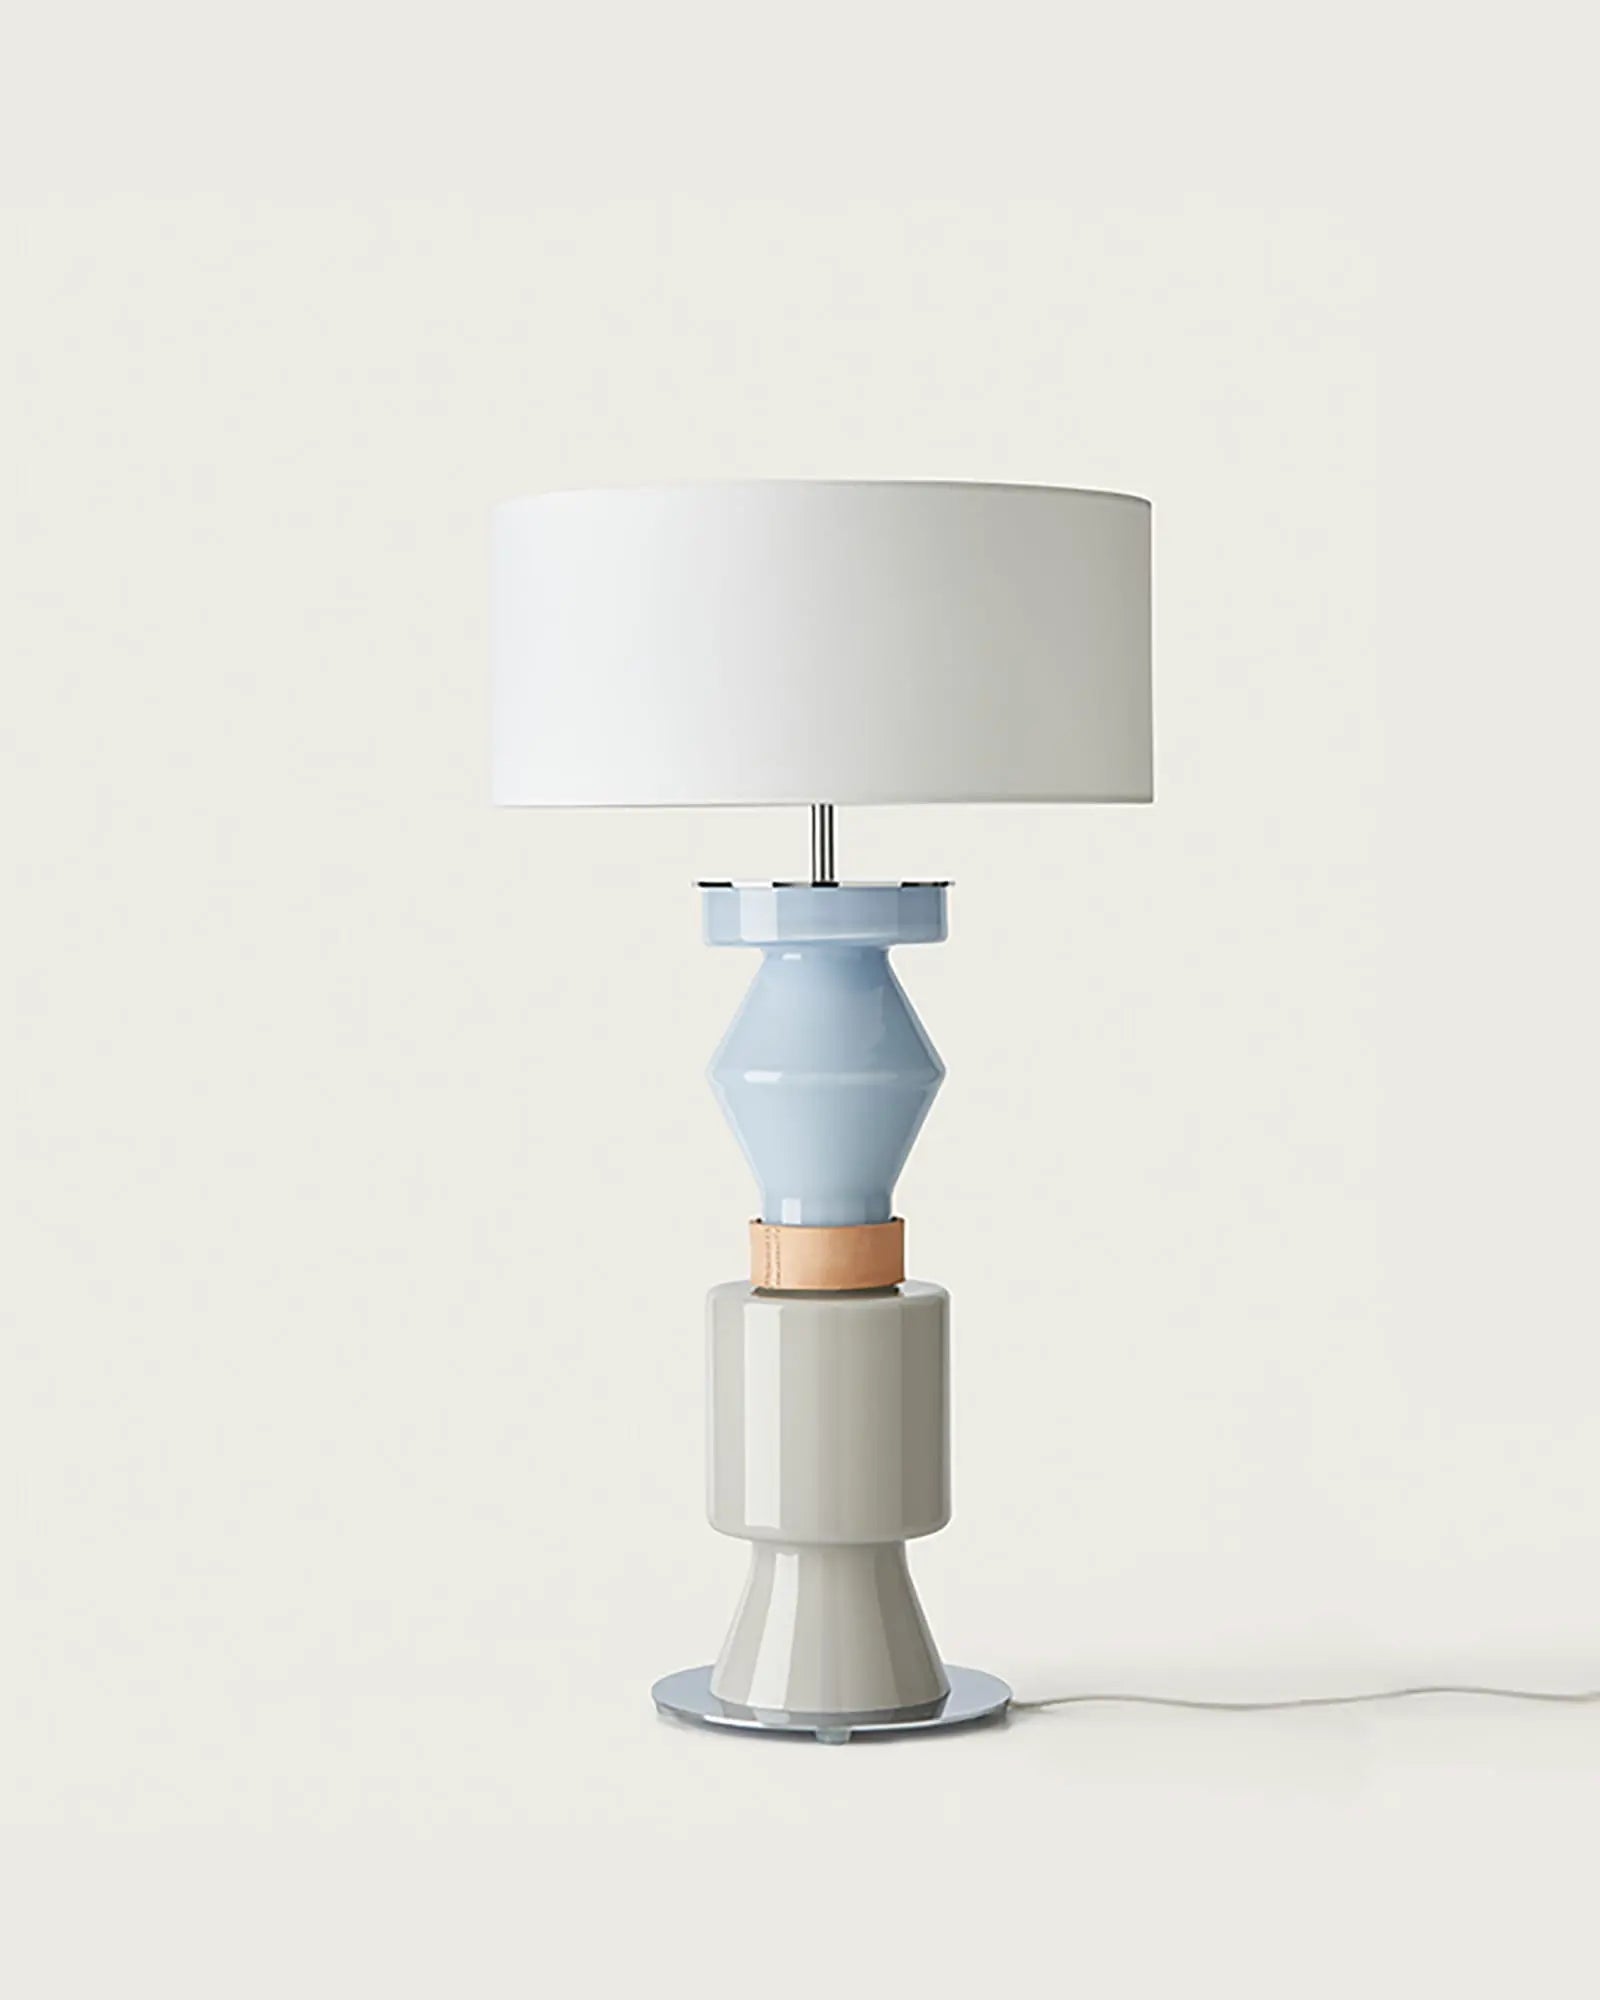 Kitta Ponn contemporary decorative table lamp in ceramic and fabric shade